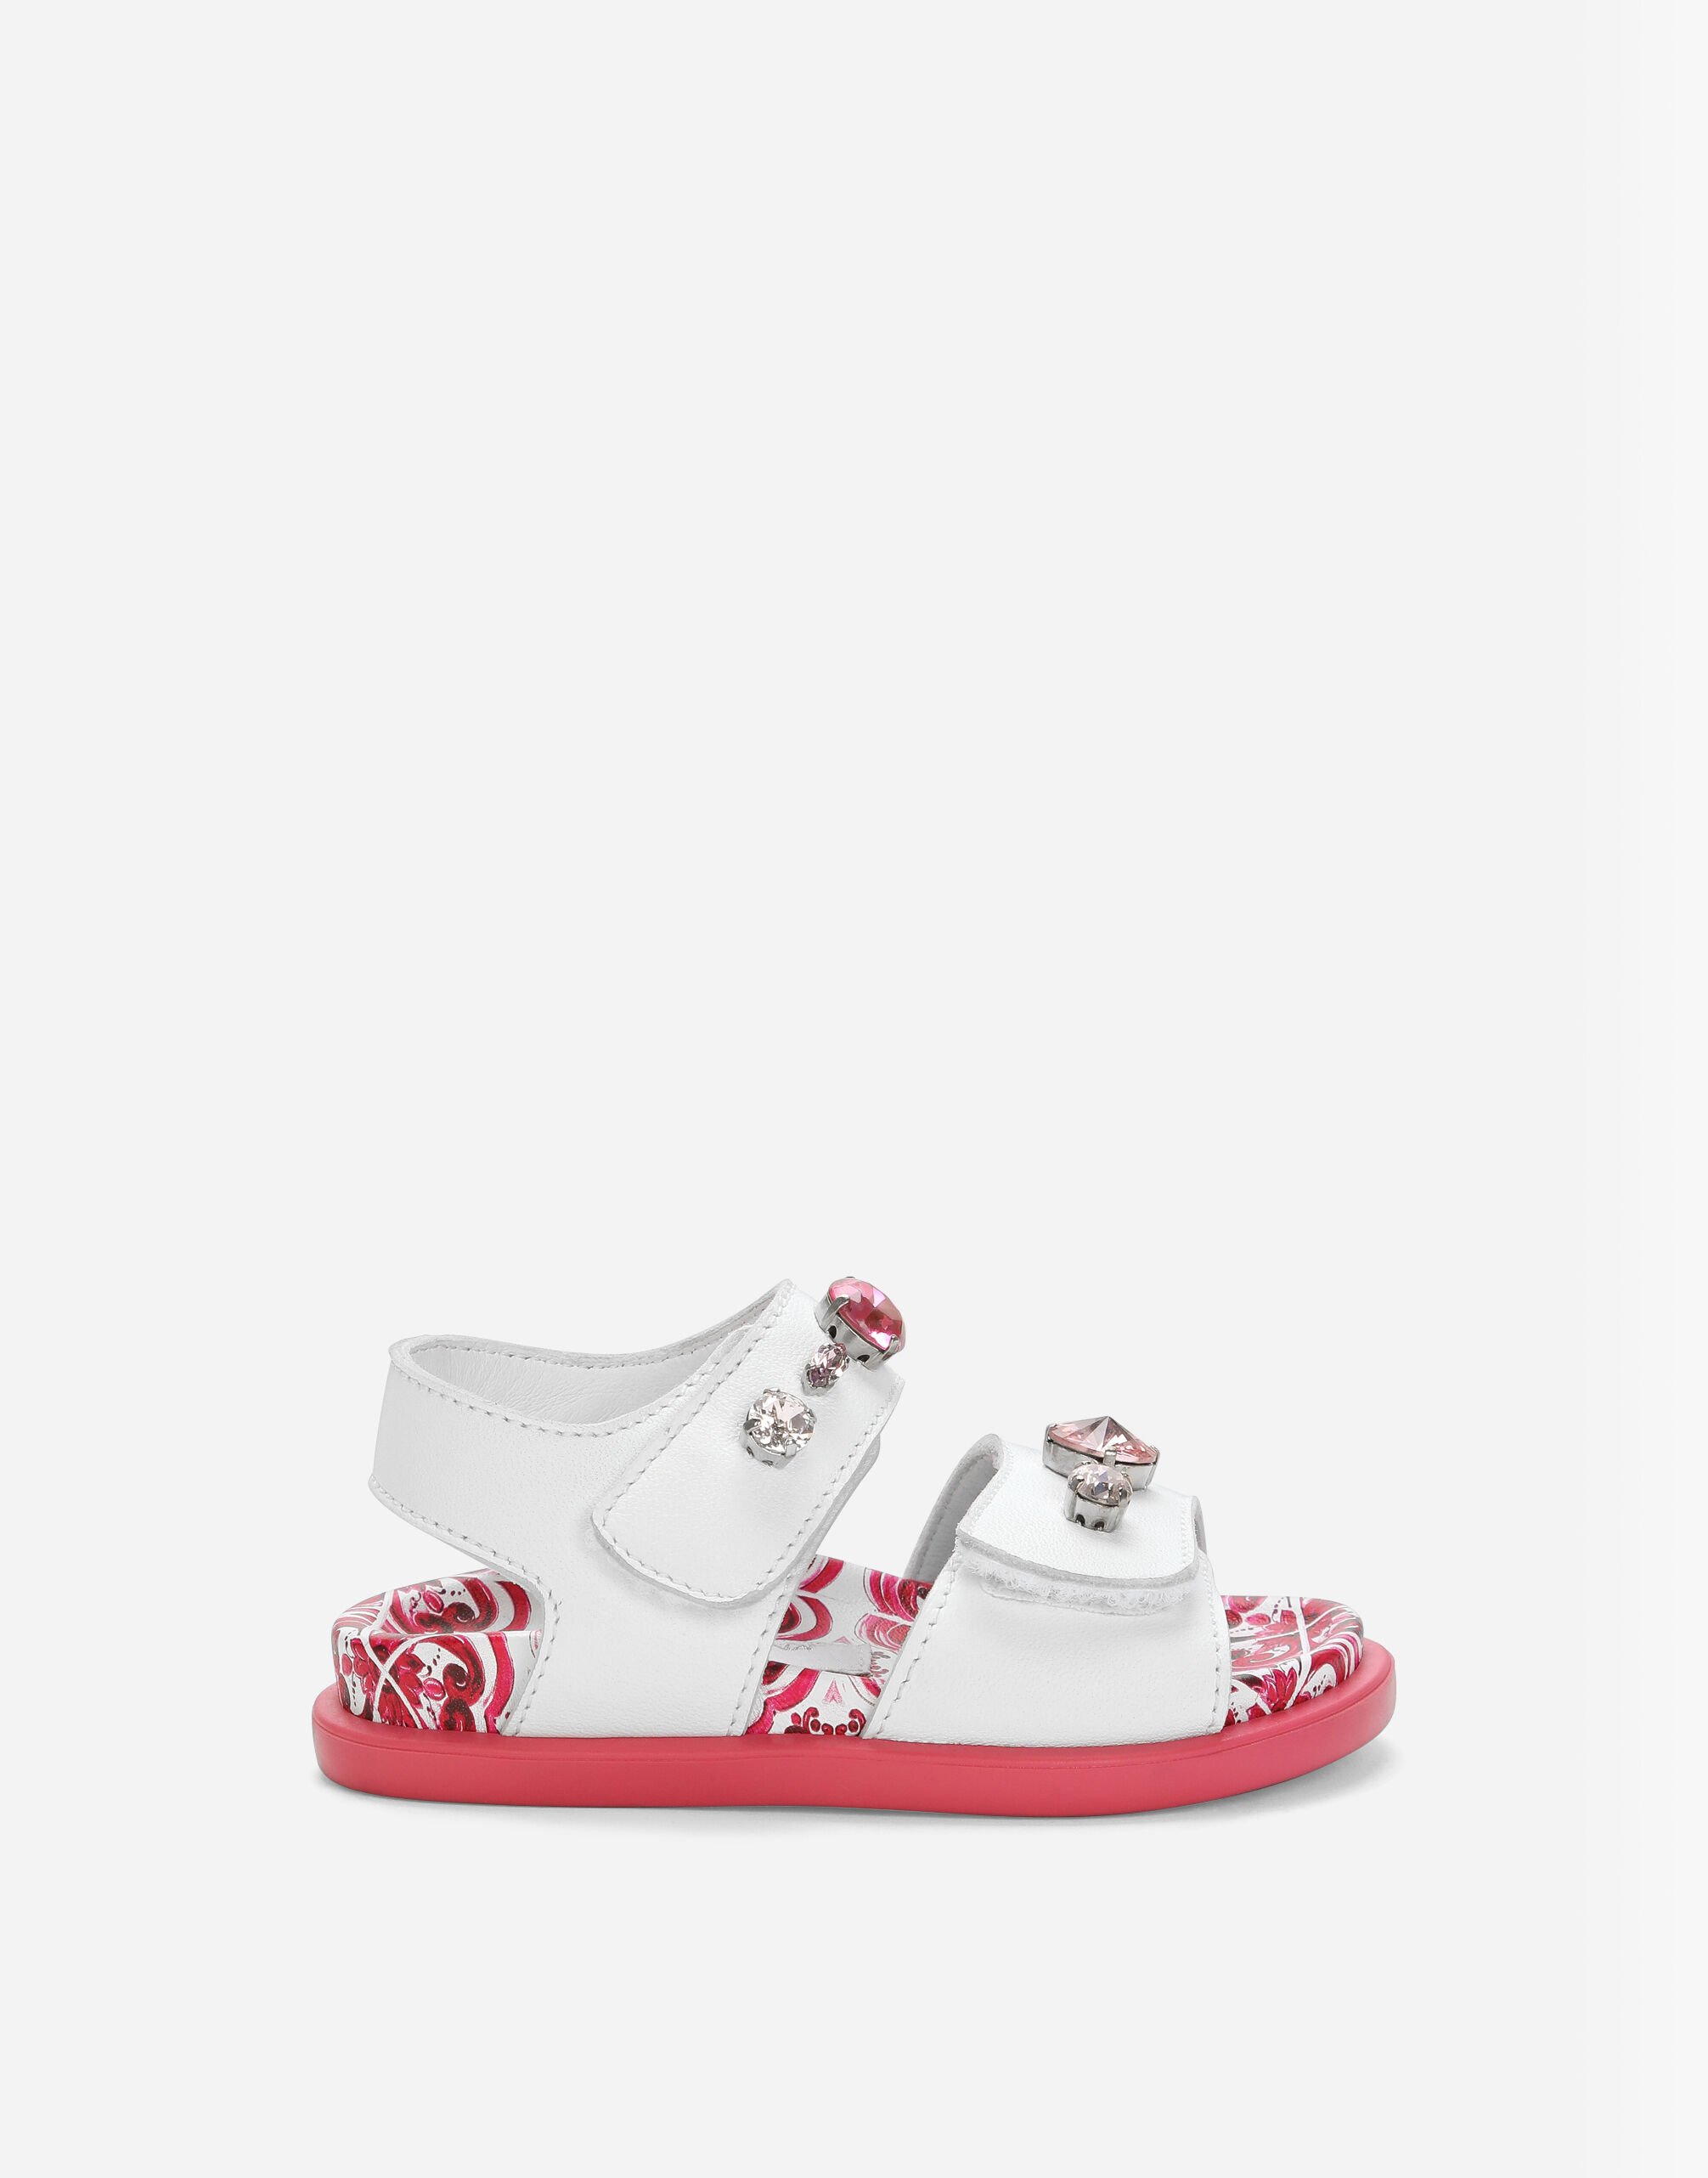 Dolce & Gabbana Patent leather sandals with embellishment Print DN0143AC374